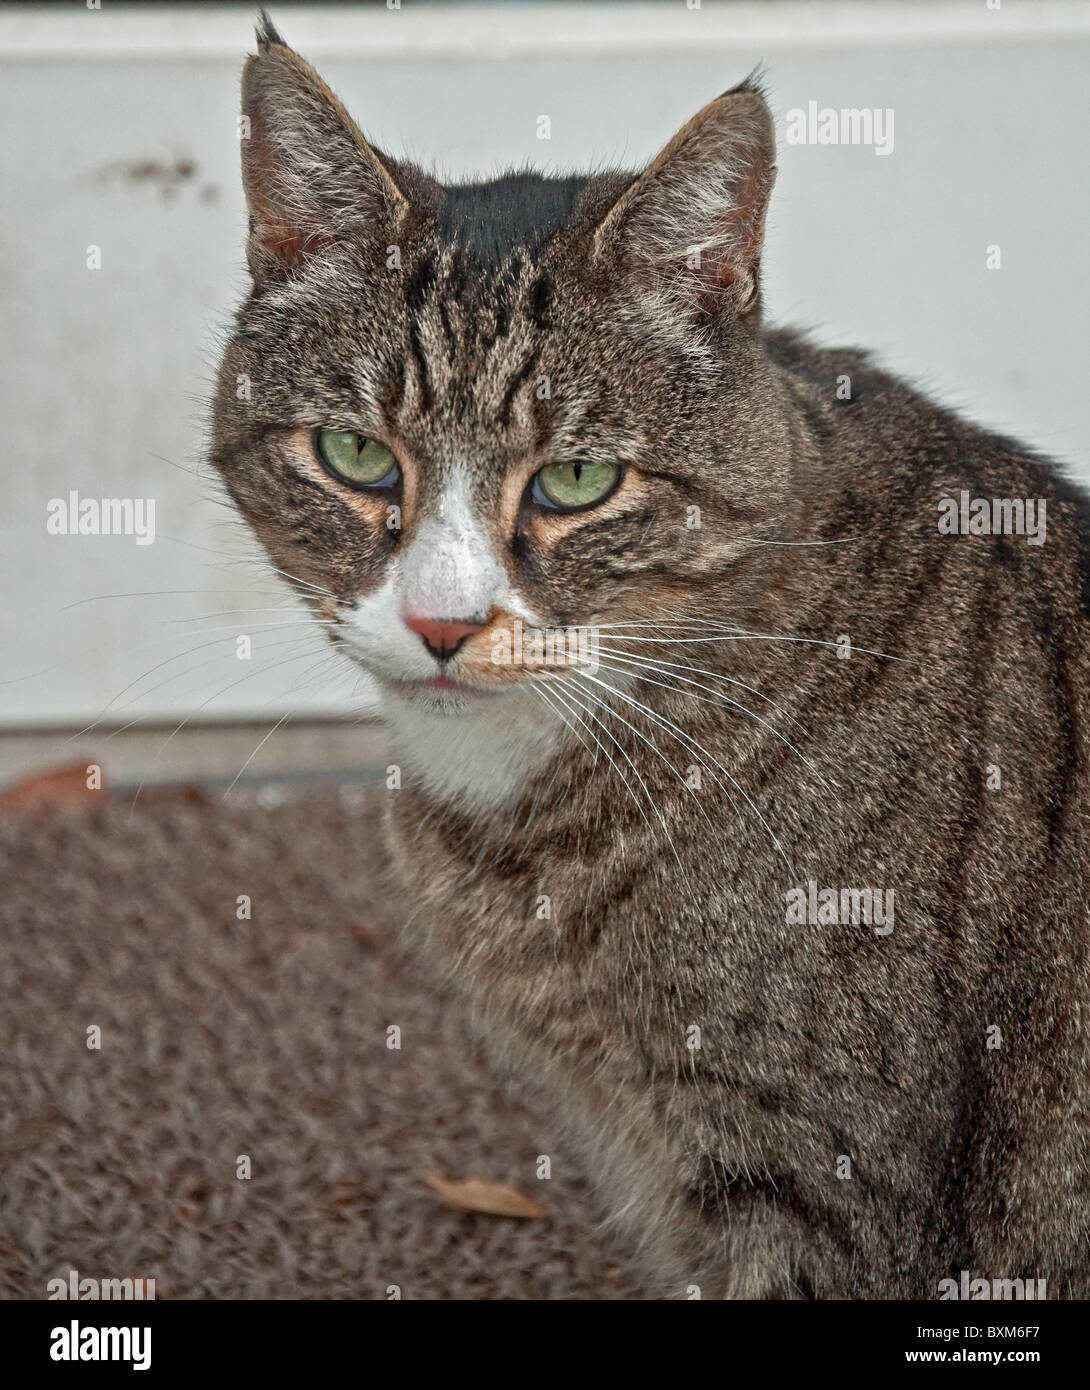 A green eyed tabby cat with pointed ears in this vertical stock image.  Kitty has gray and black stripes. Stock Photo